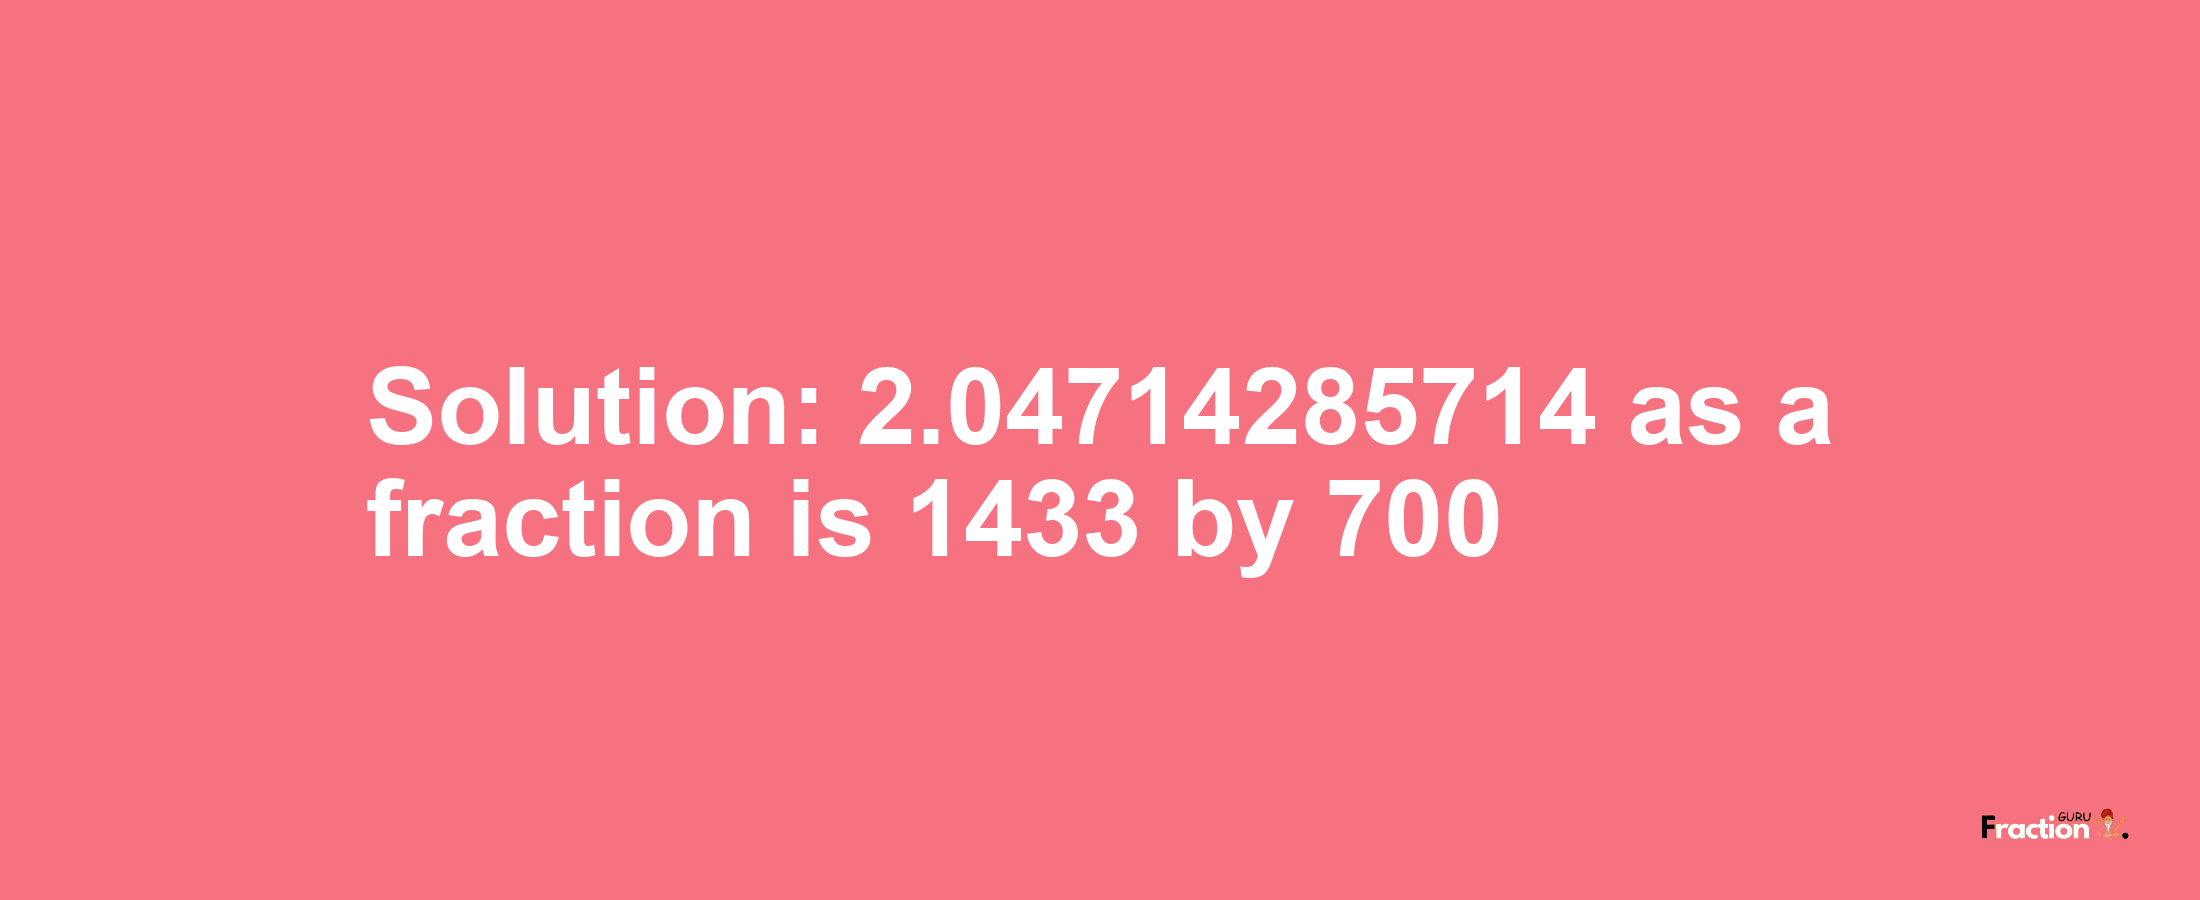 Solution:2.04714285714 as a fraction is 1433/700